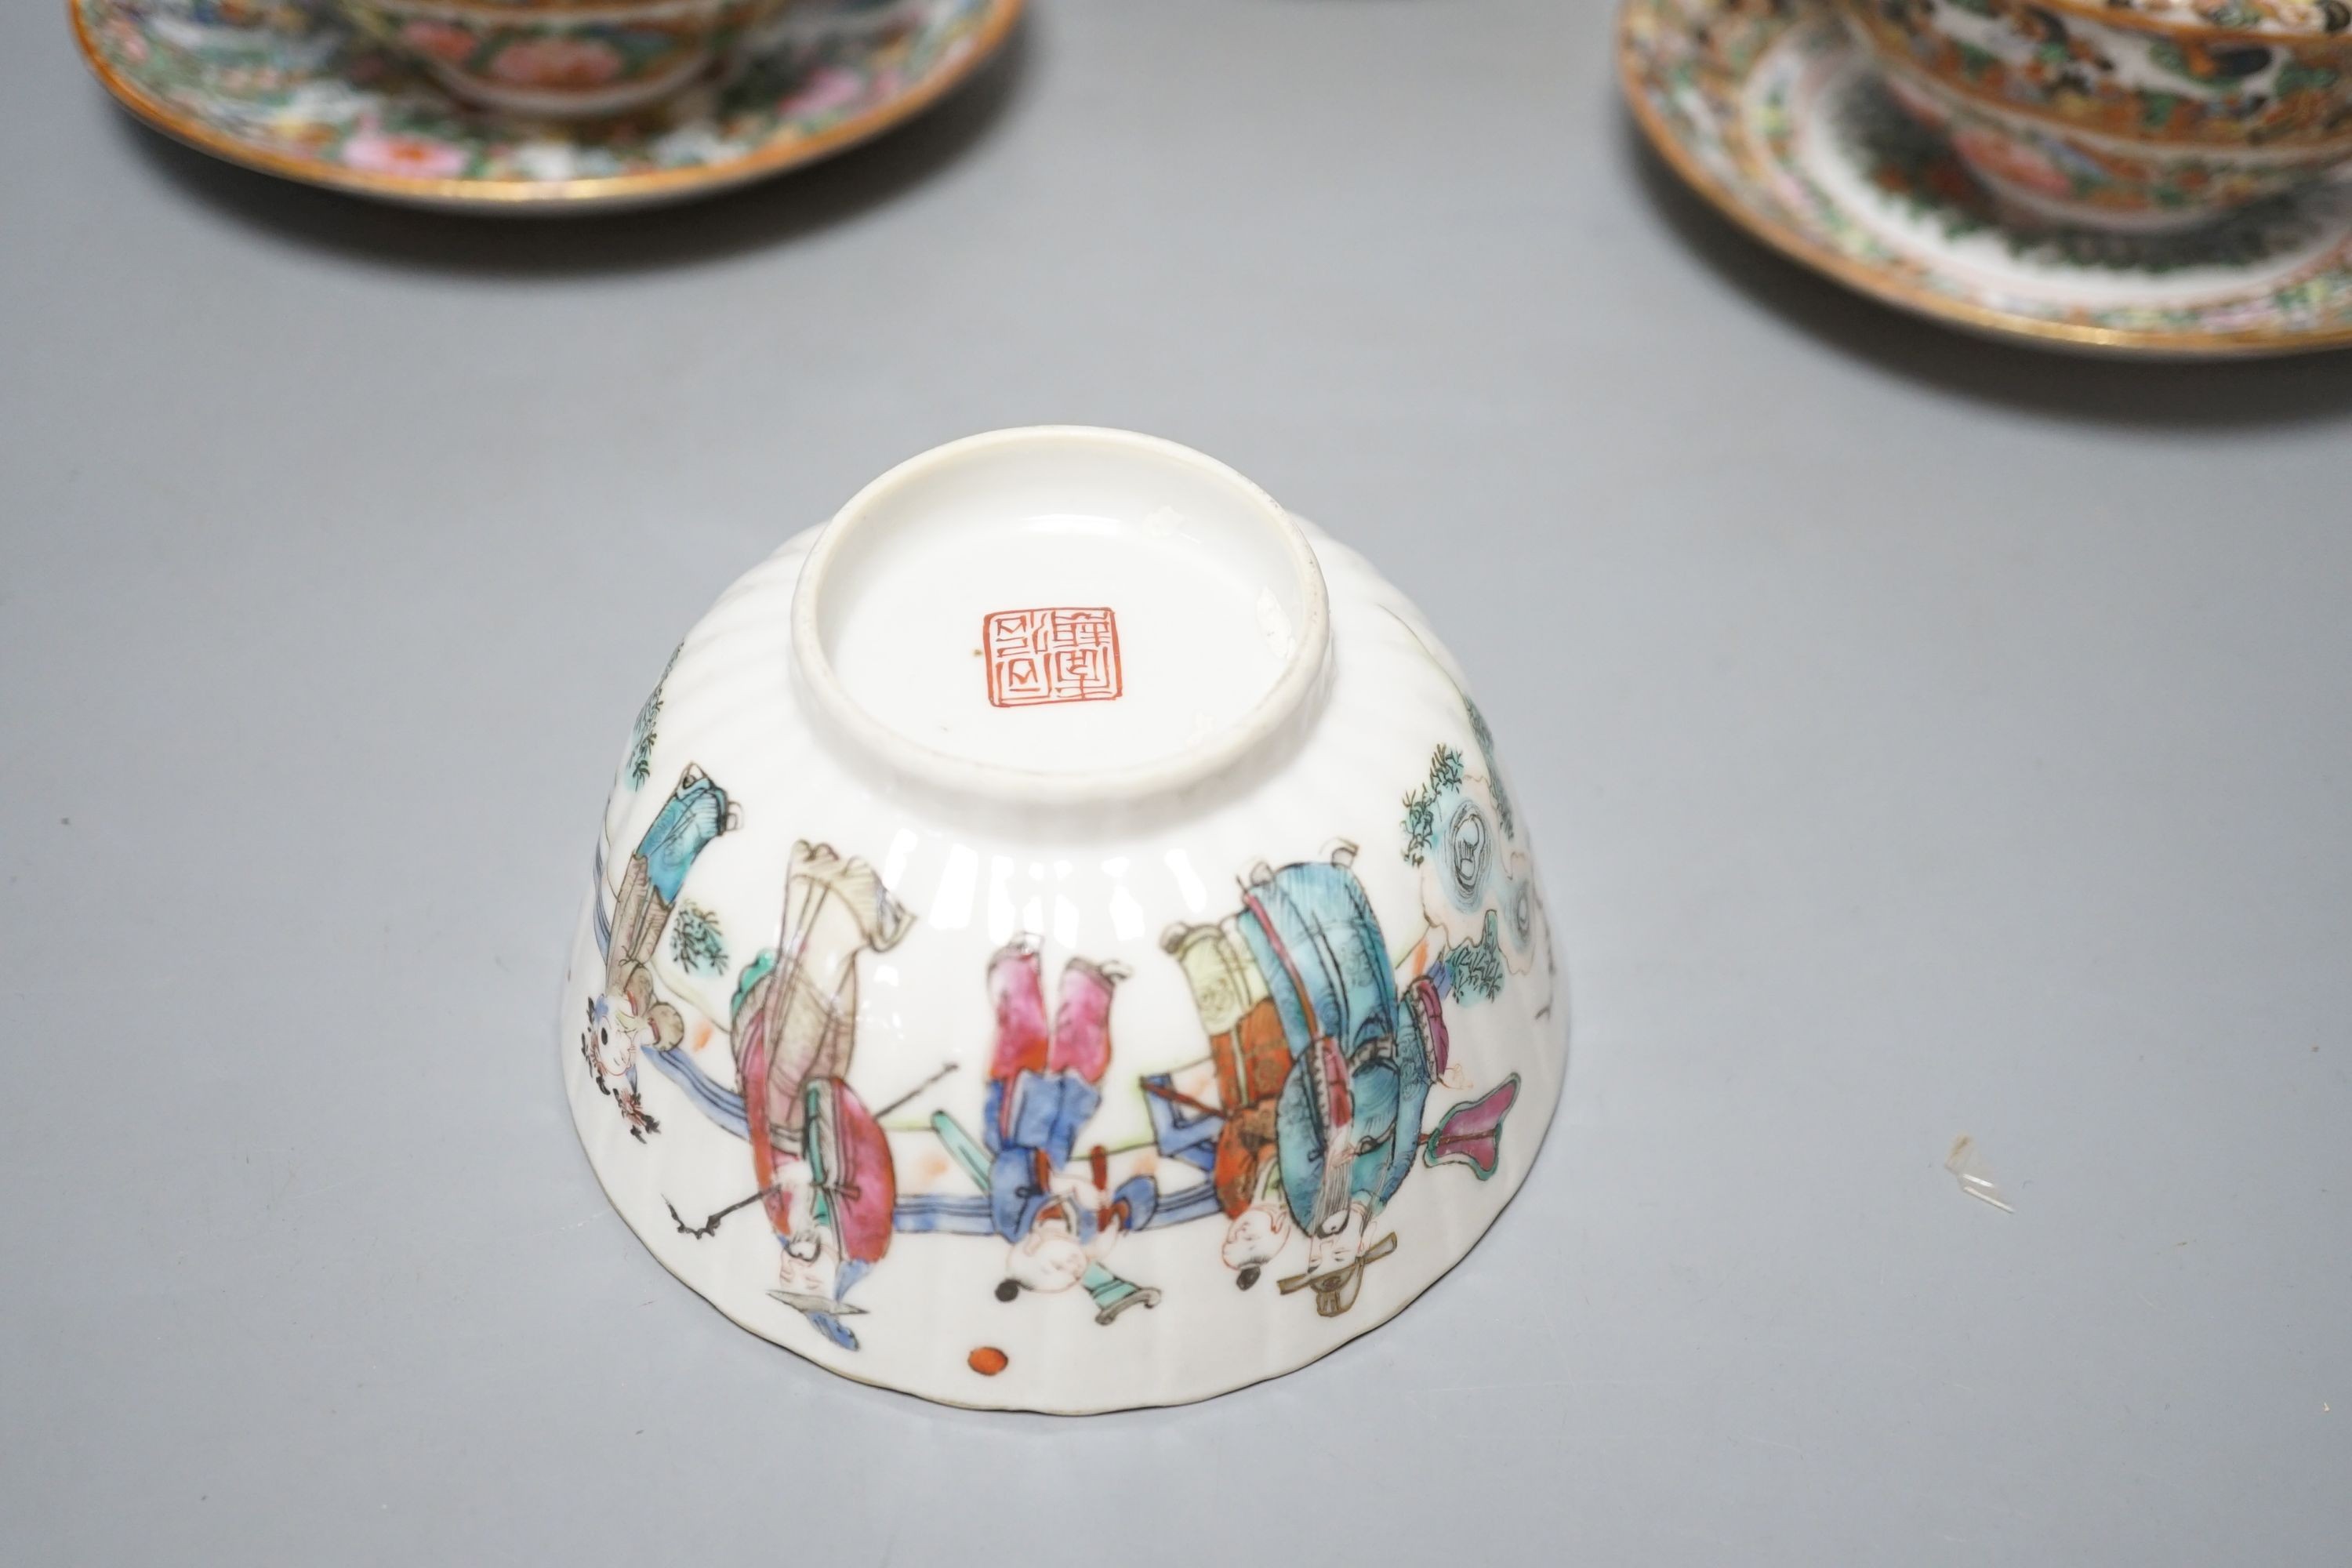 A Chinese porcelain tea bowl and stand and a pair of Cantonese bowls, covers and stands, 14cm diameter